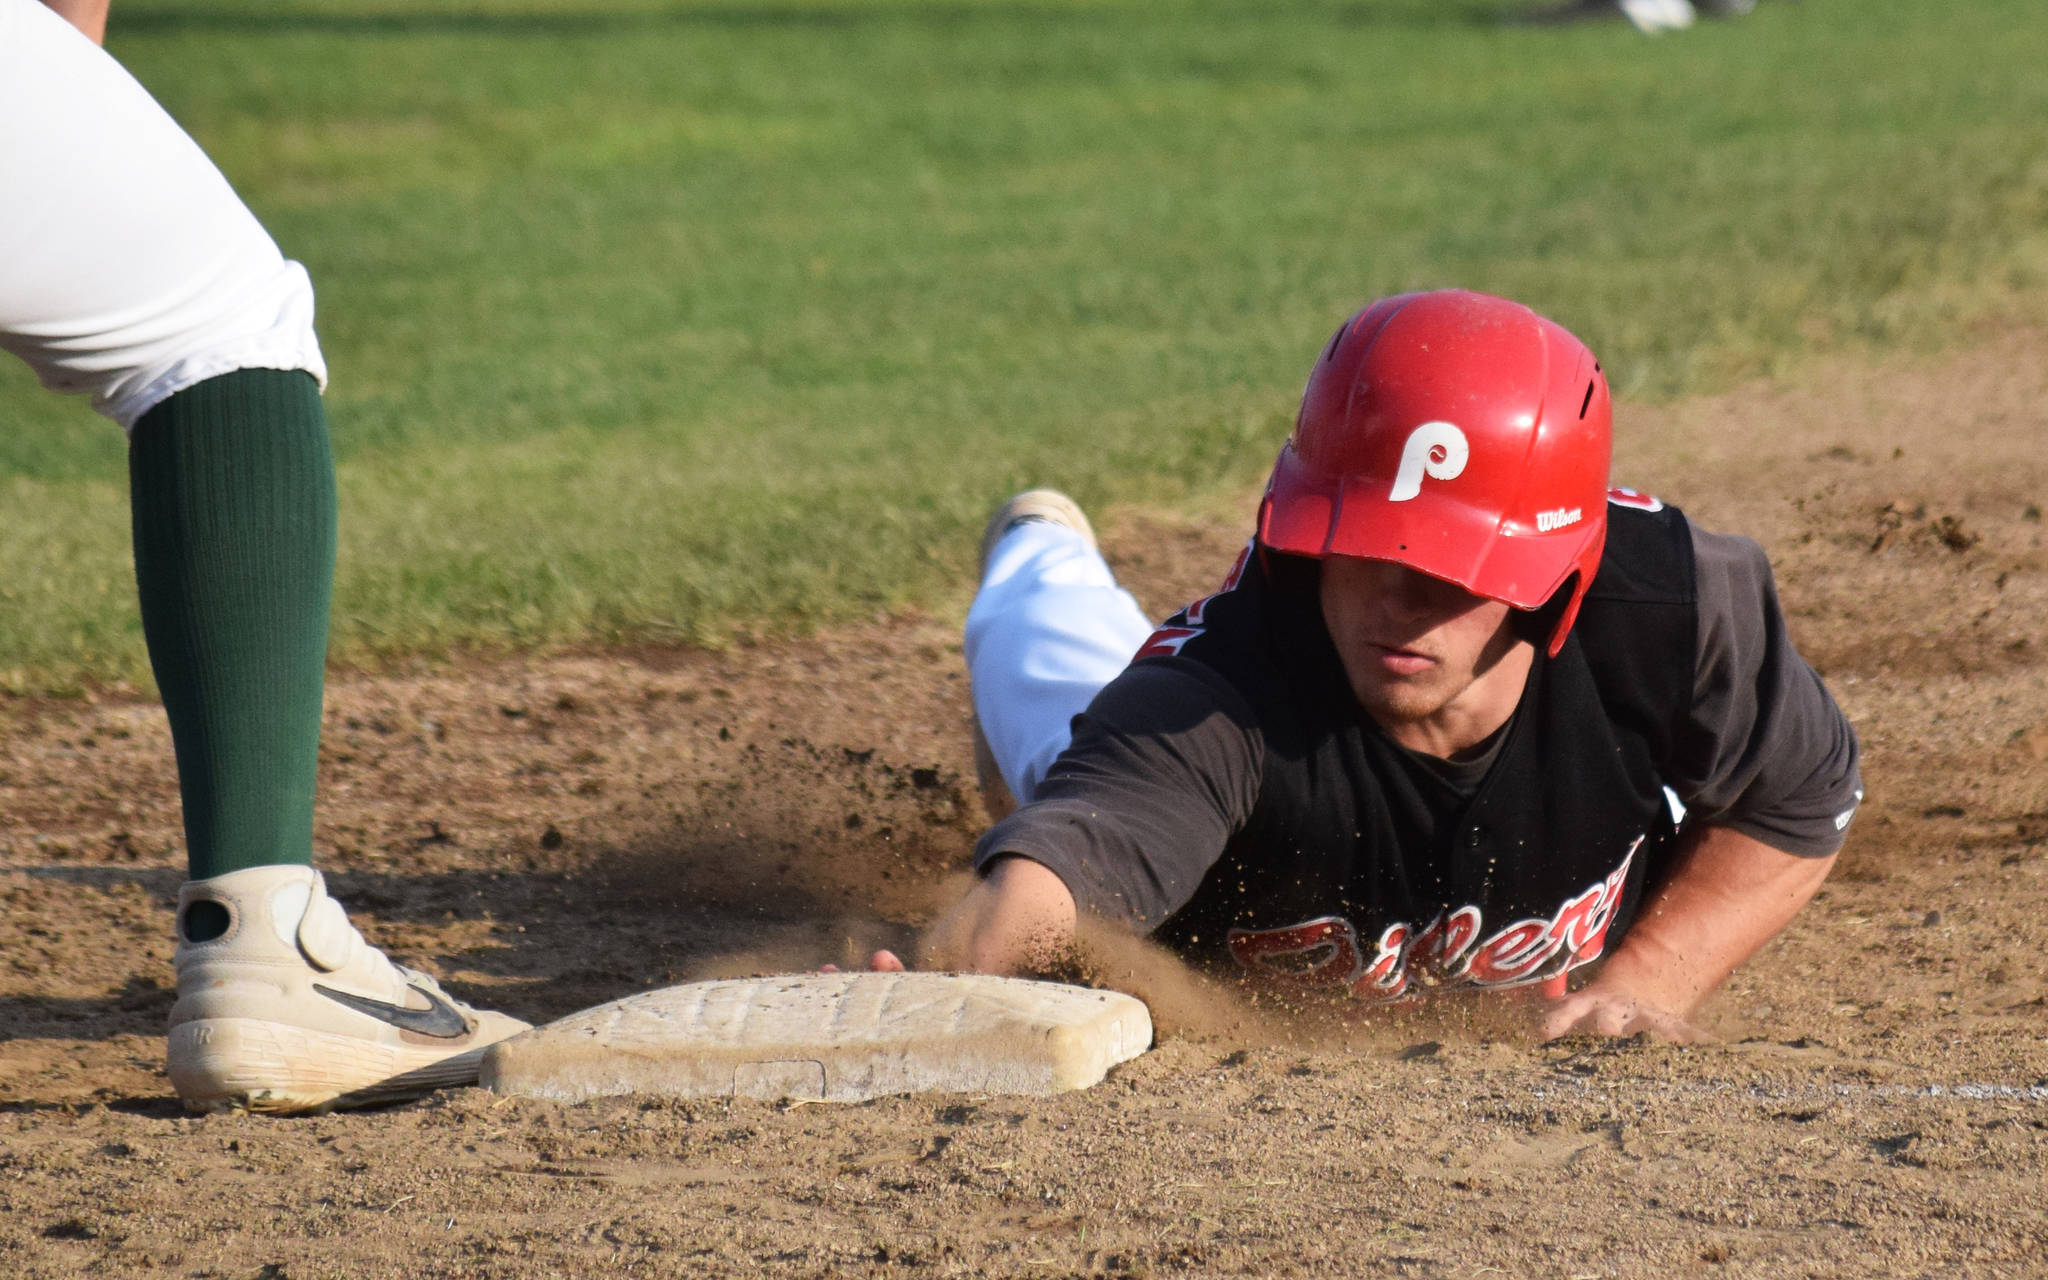 Peninsula Oilers baserunner Paul Steffensen tags first base to avoid the glove of Mat-Su Miners first baseman Drew Williamson Friday at Coral Seymour Memorial Park in Kenai. (Photo by Joey Klecka/Peninsula Clarion)